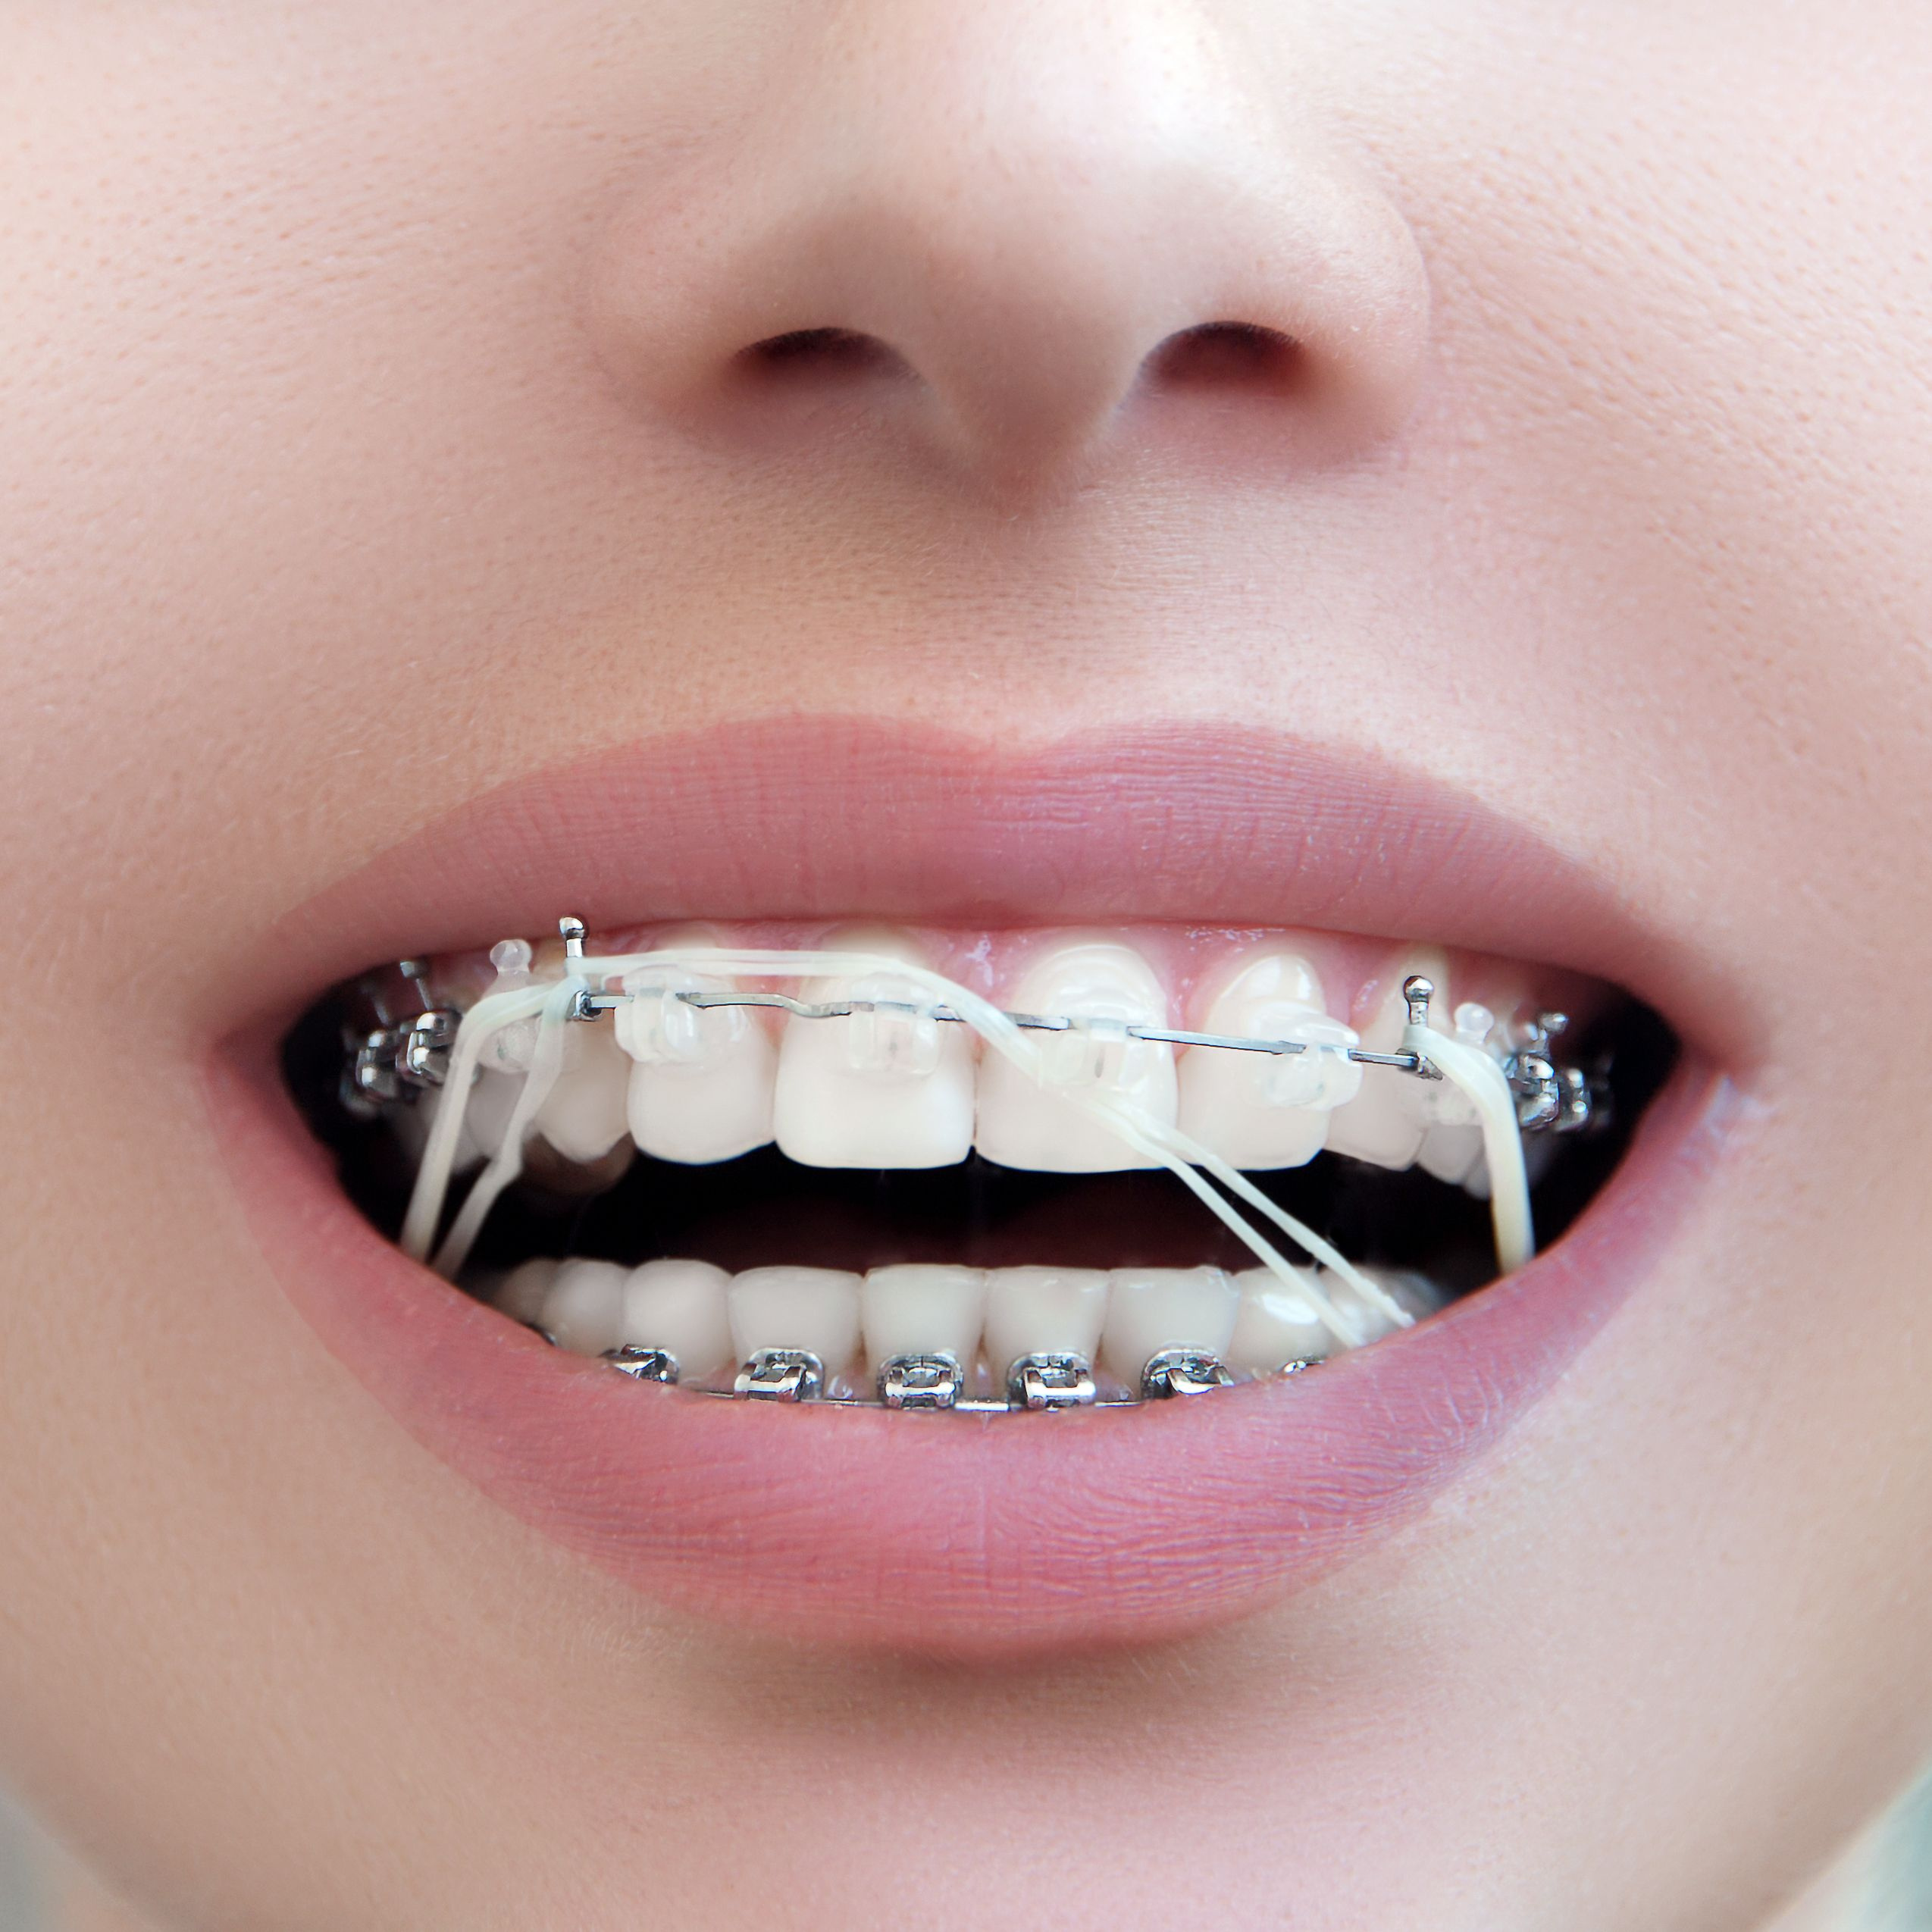 Lady wears rubber bands on her South Houston braces.